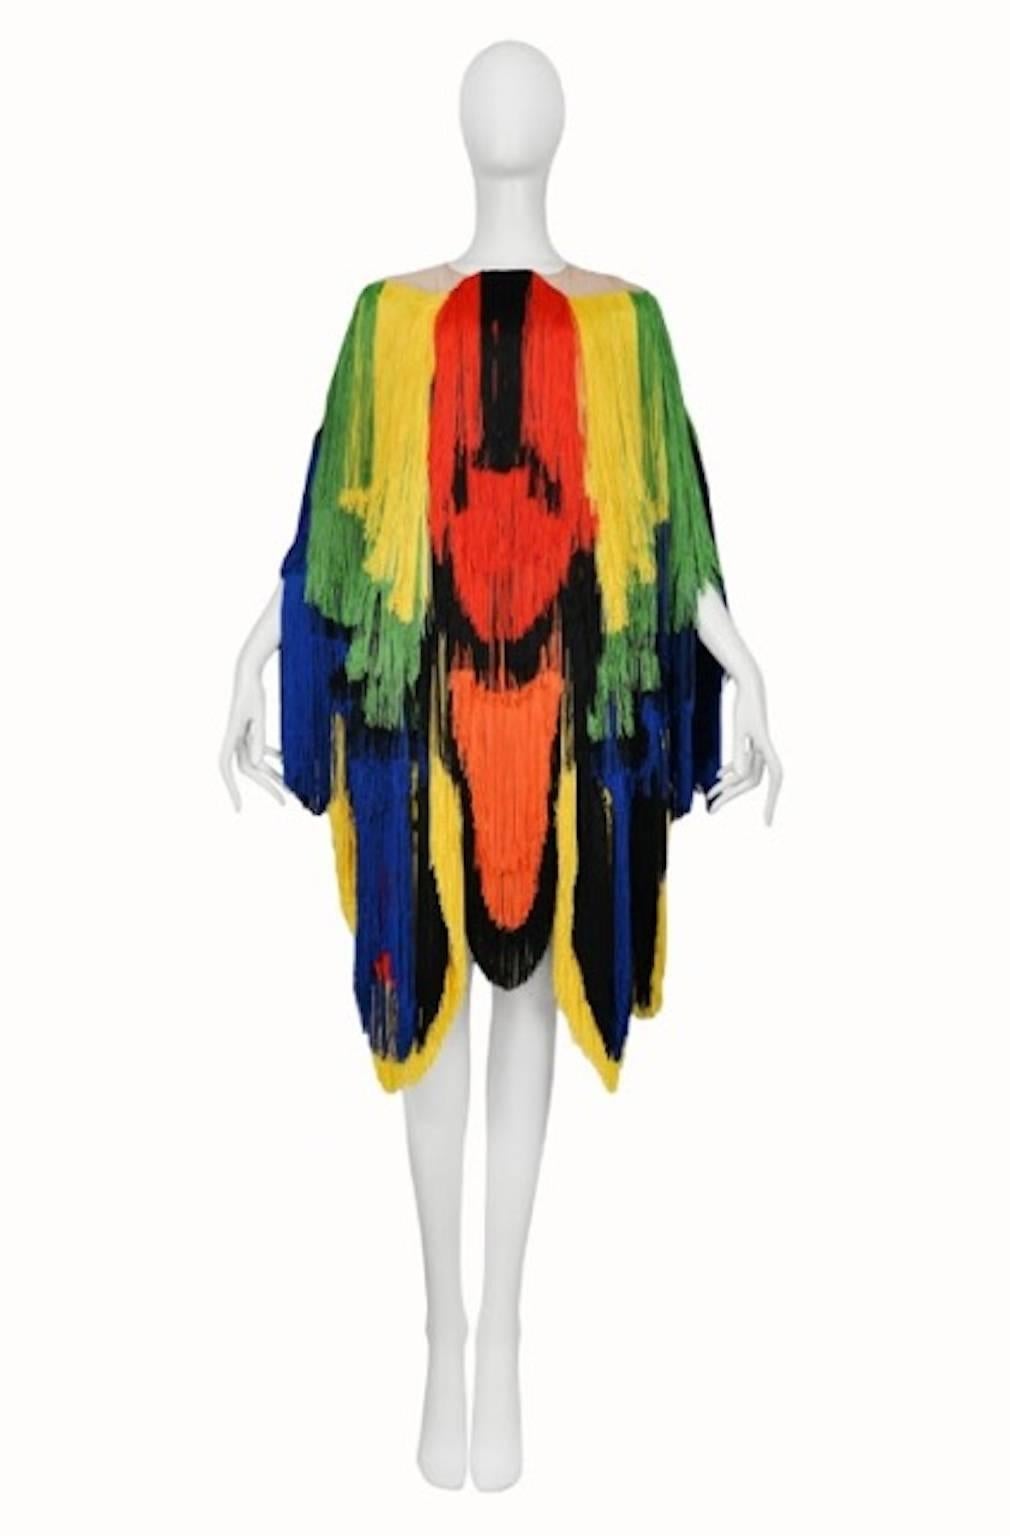 Vintage Maison Martin Margiela Couture Artisanal Kite Tunic. A tunic is made from a kite, the patterns of which are embroidered with multi-colored fringe from various kites. 35 hours to produce. Runway piece from the Spring / Summer 2009 Collection.